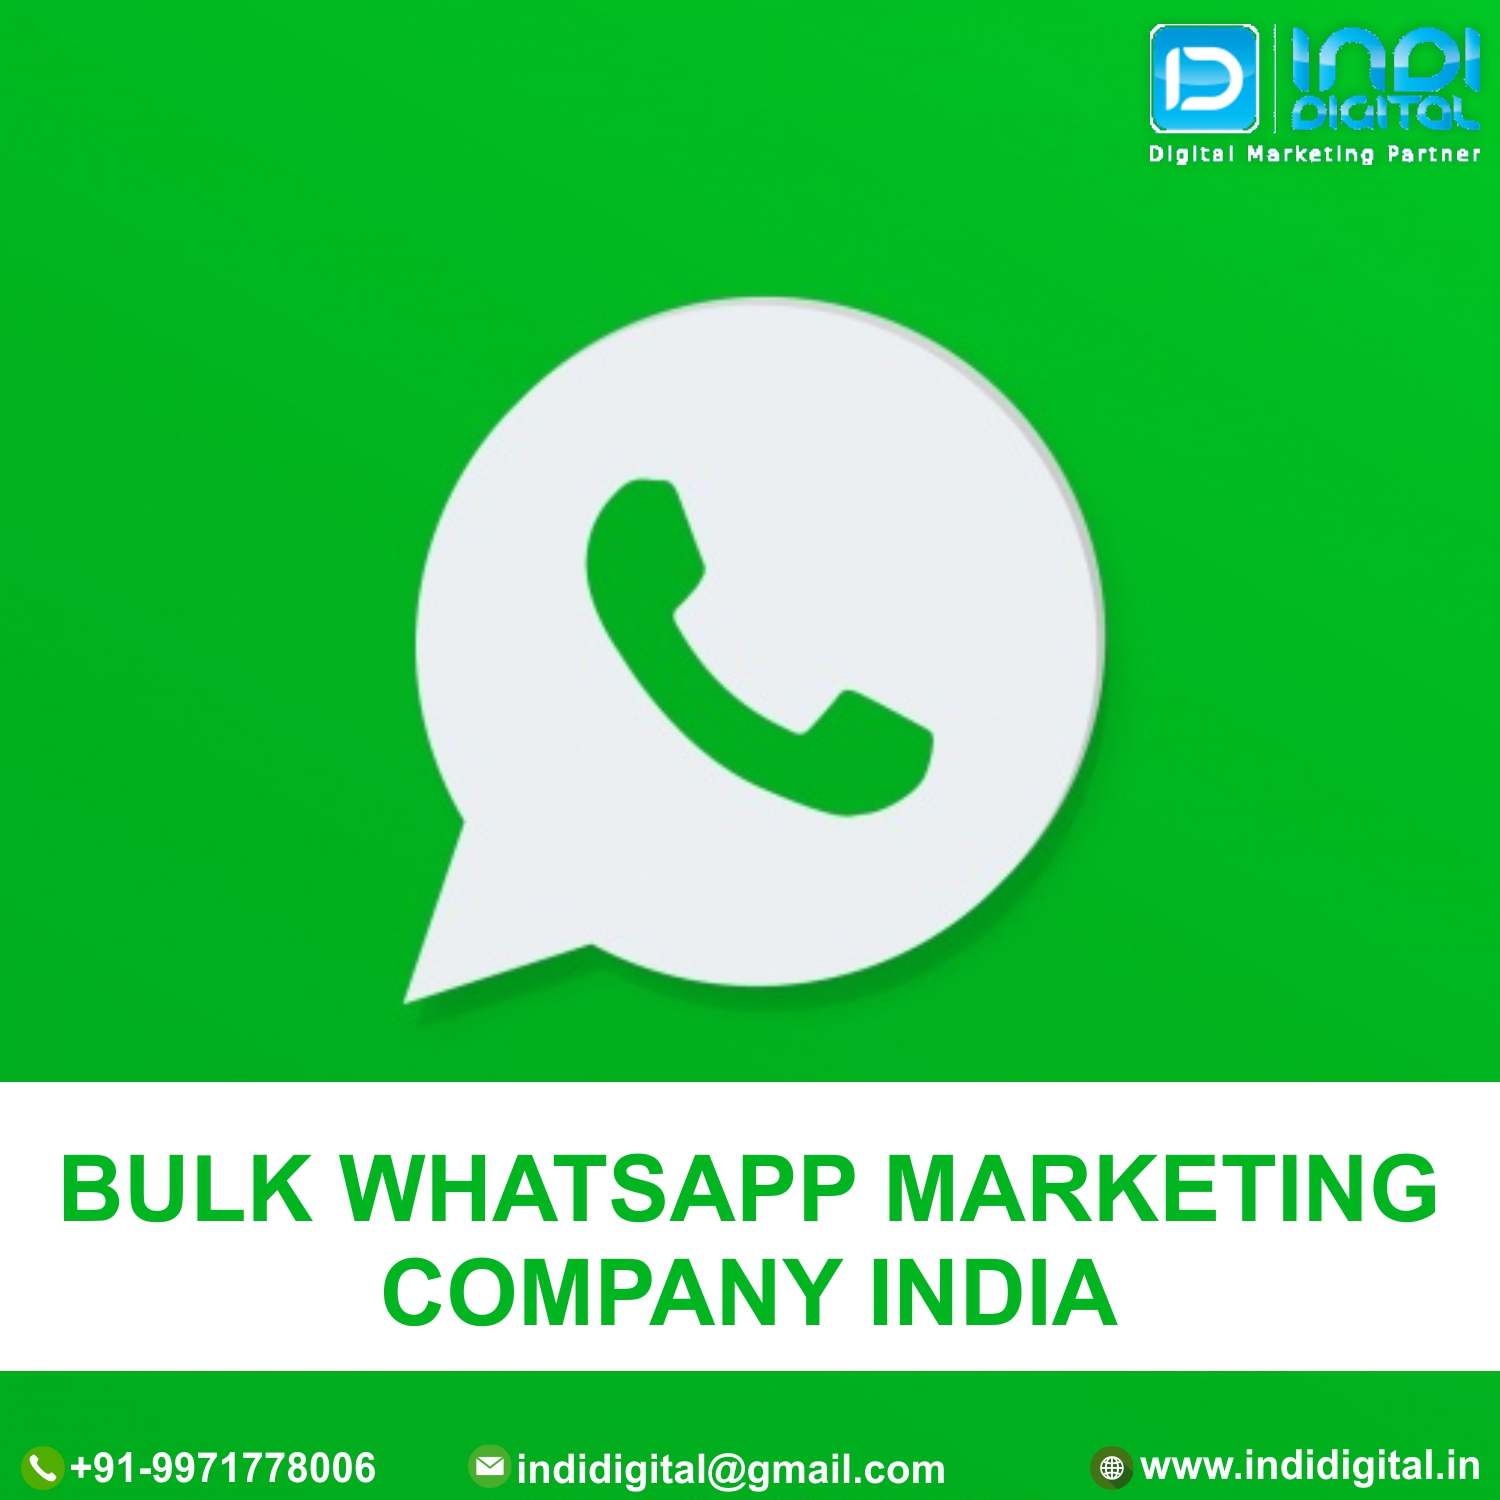 Which is the best company for WhatsApp marketing